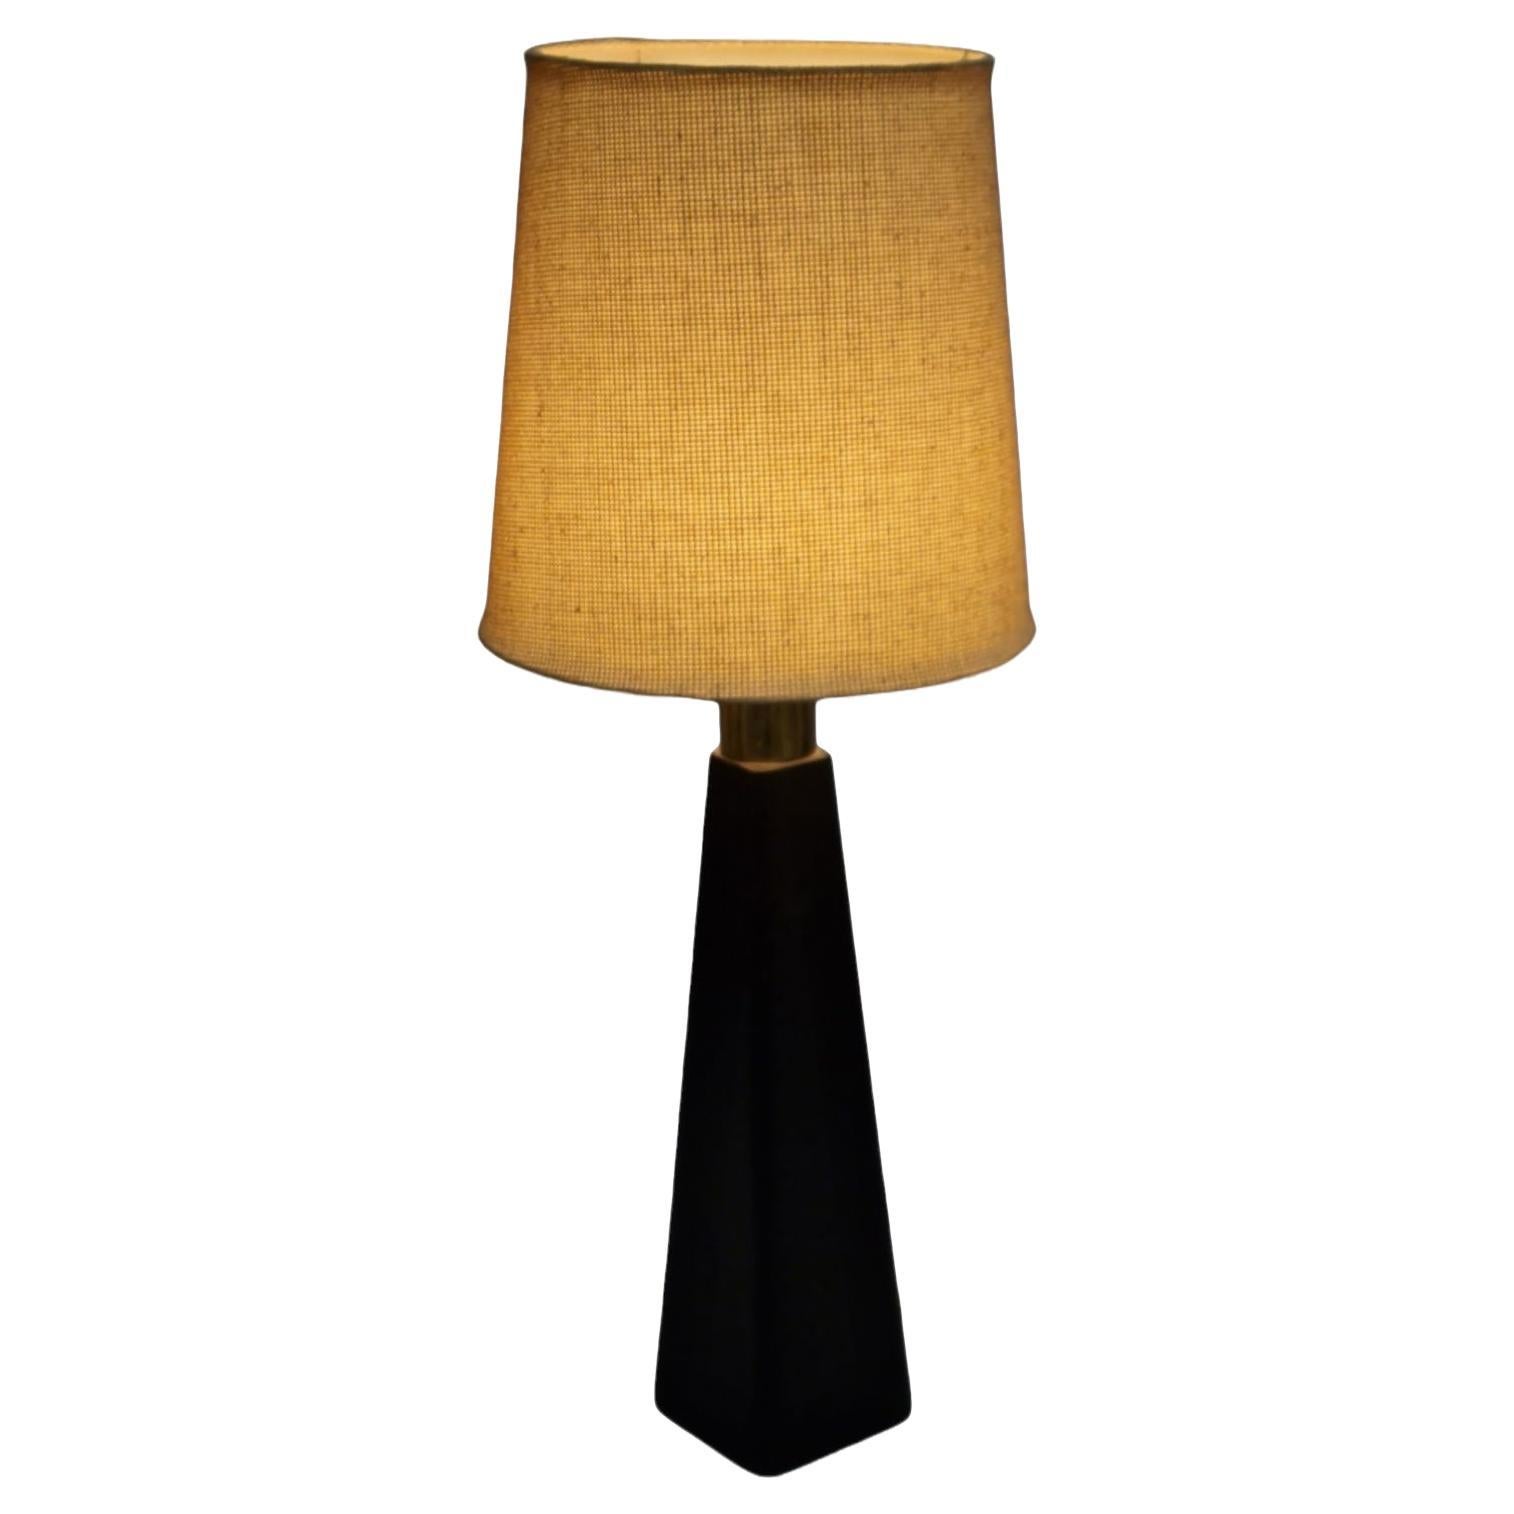 Lisa Johansson-Papé Table Lamp 46-186 LJP in Leather and Linen, Orno For Sale